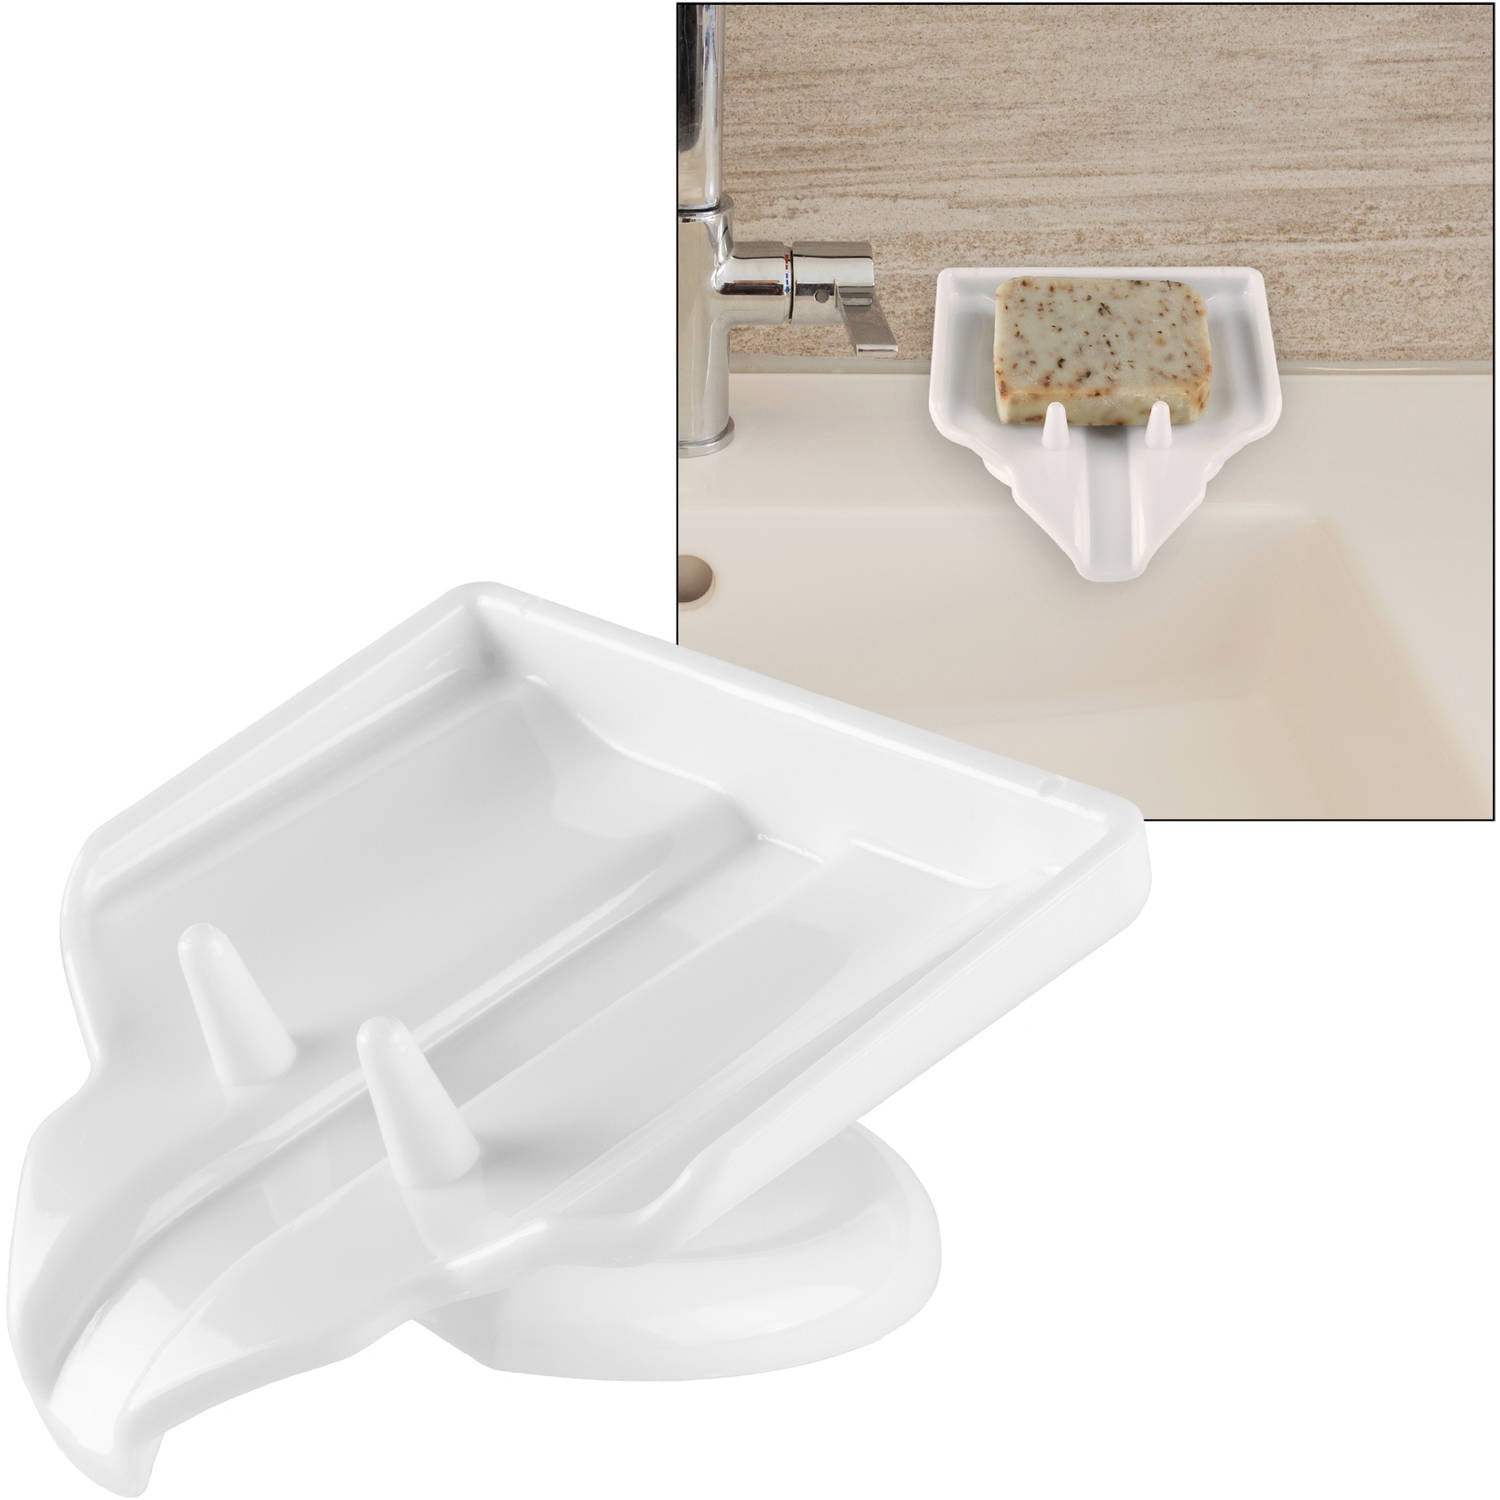 Home Soap Holder Container Soap Dishes Soap Box Drain Kitchen Sink Sponge Holder 